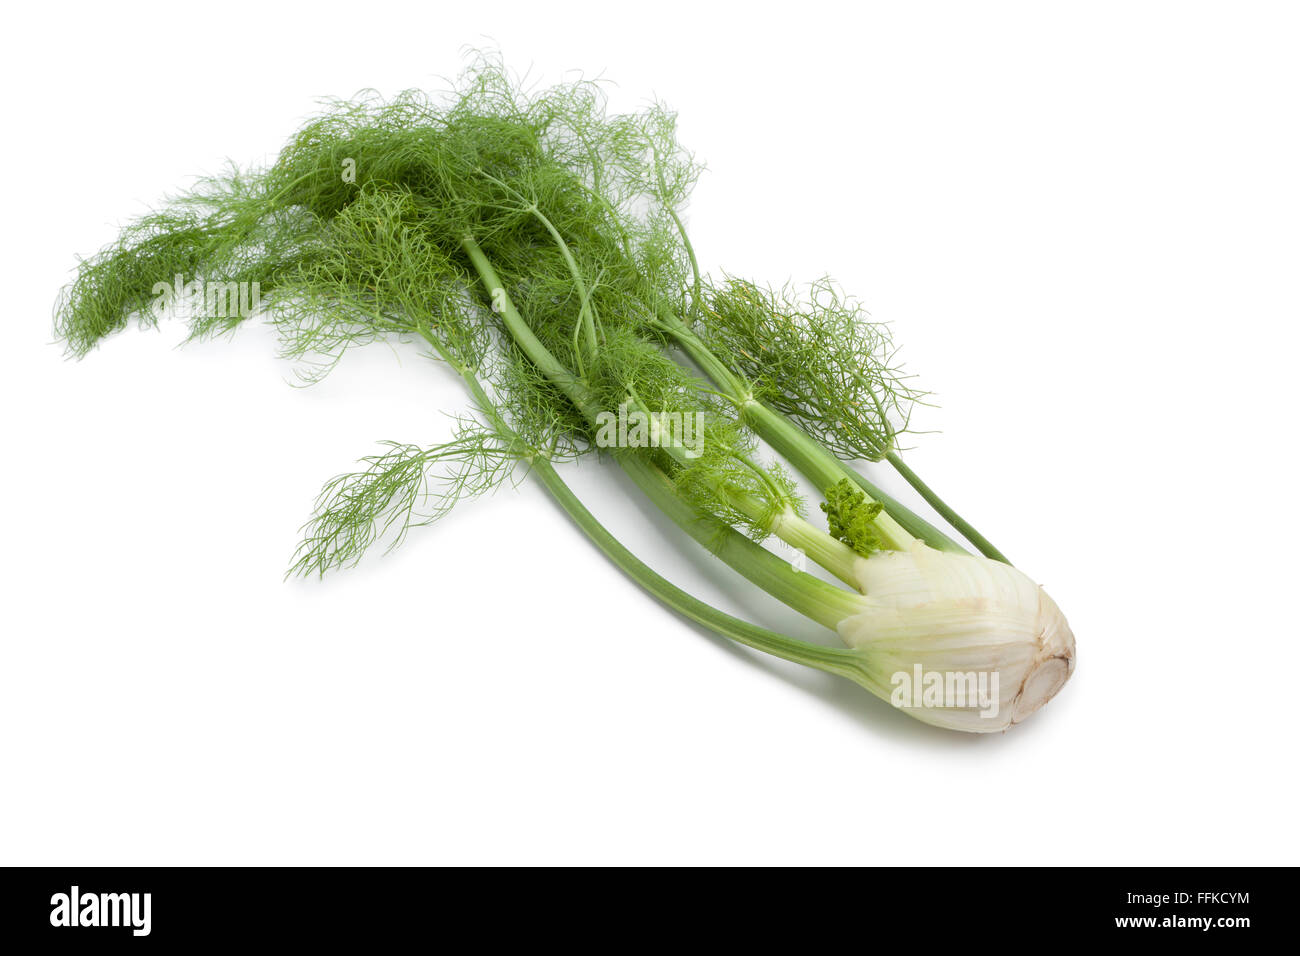 Fresh fennel bulb with green leaves on white background Stock Photo